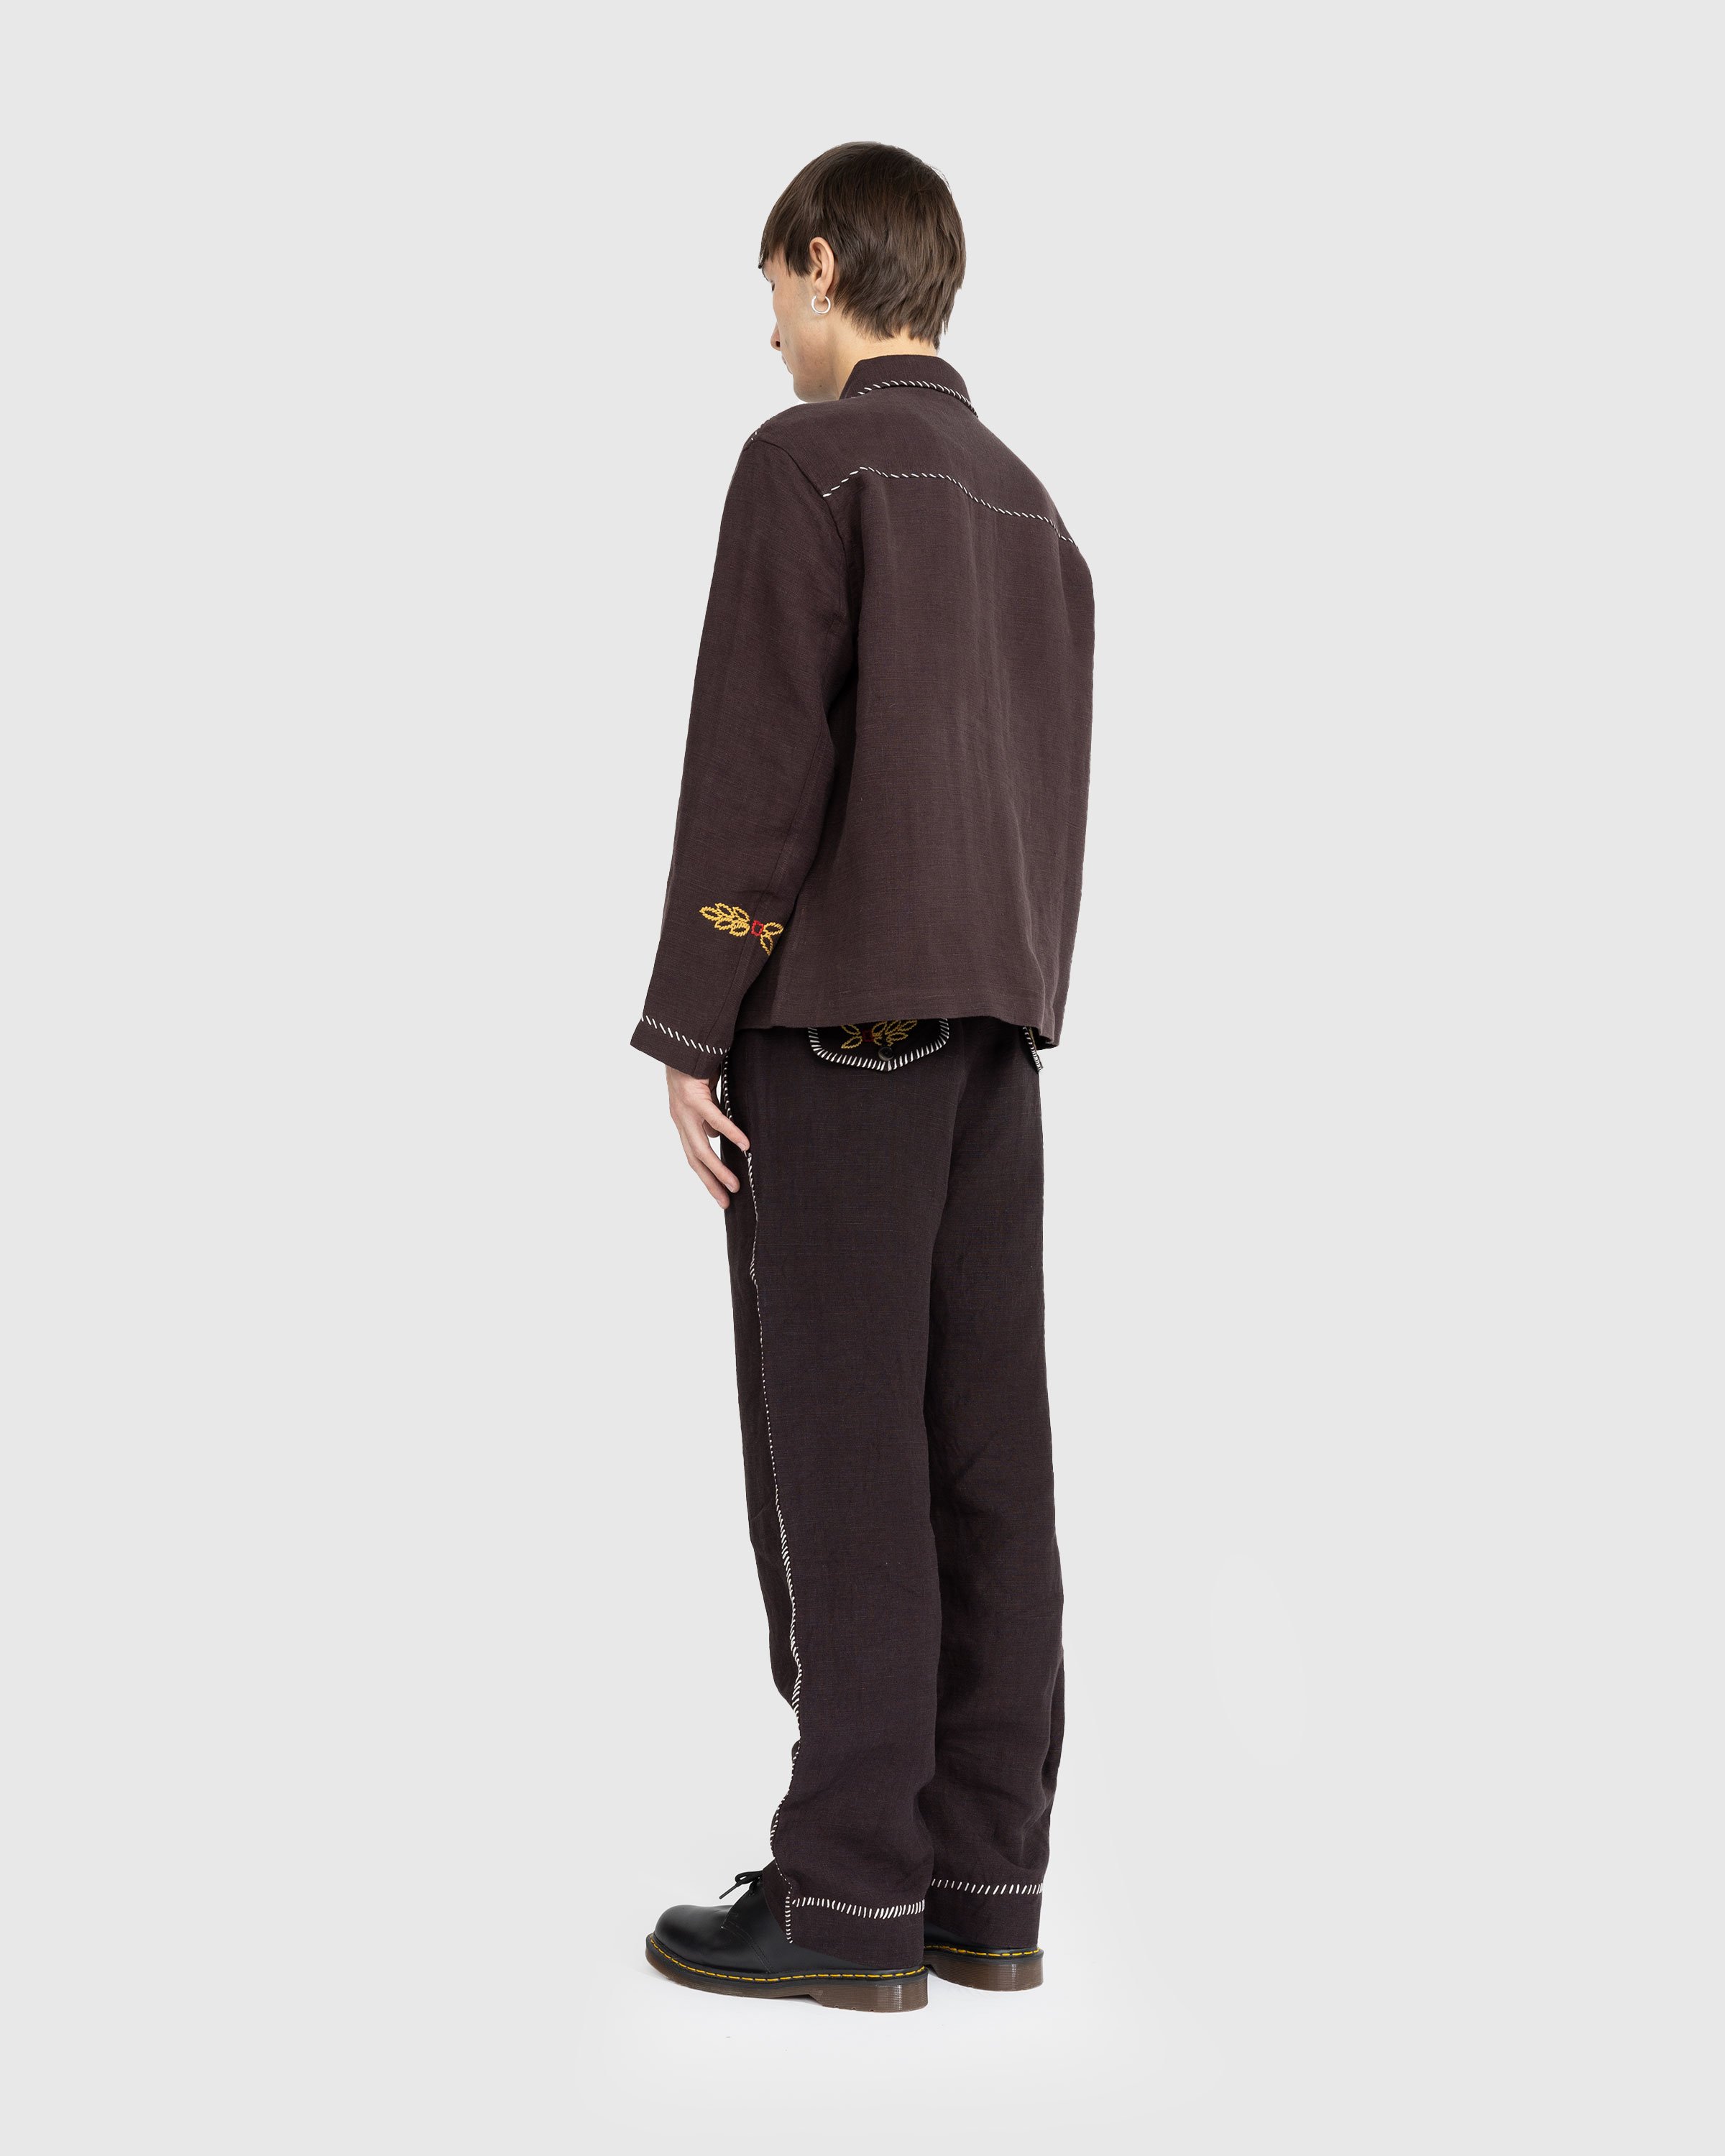 Bode - Show Pony Overshirt Brown - Clothing - BROWN - Image 4